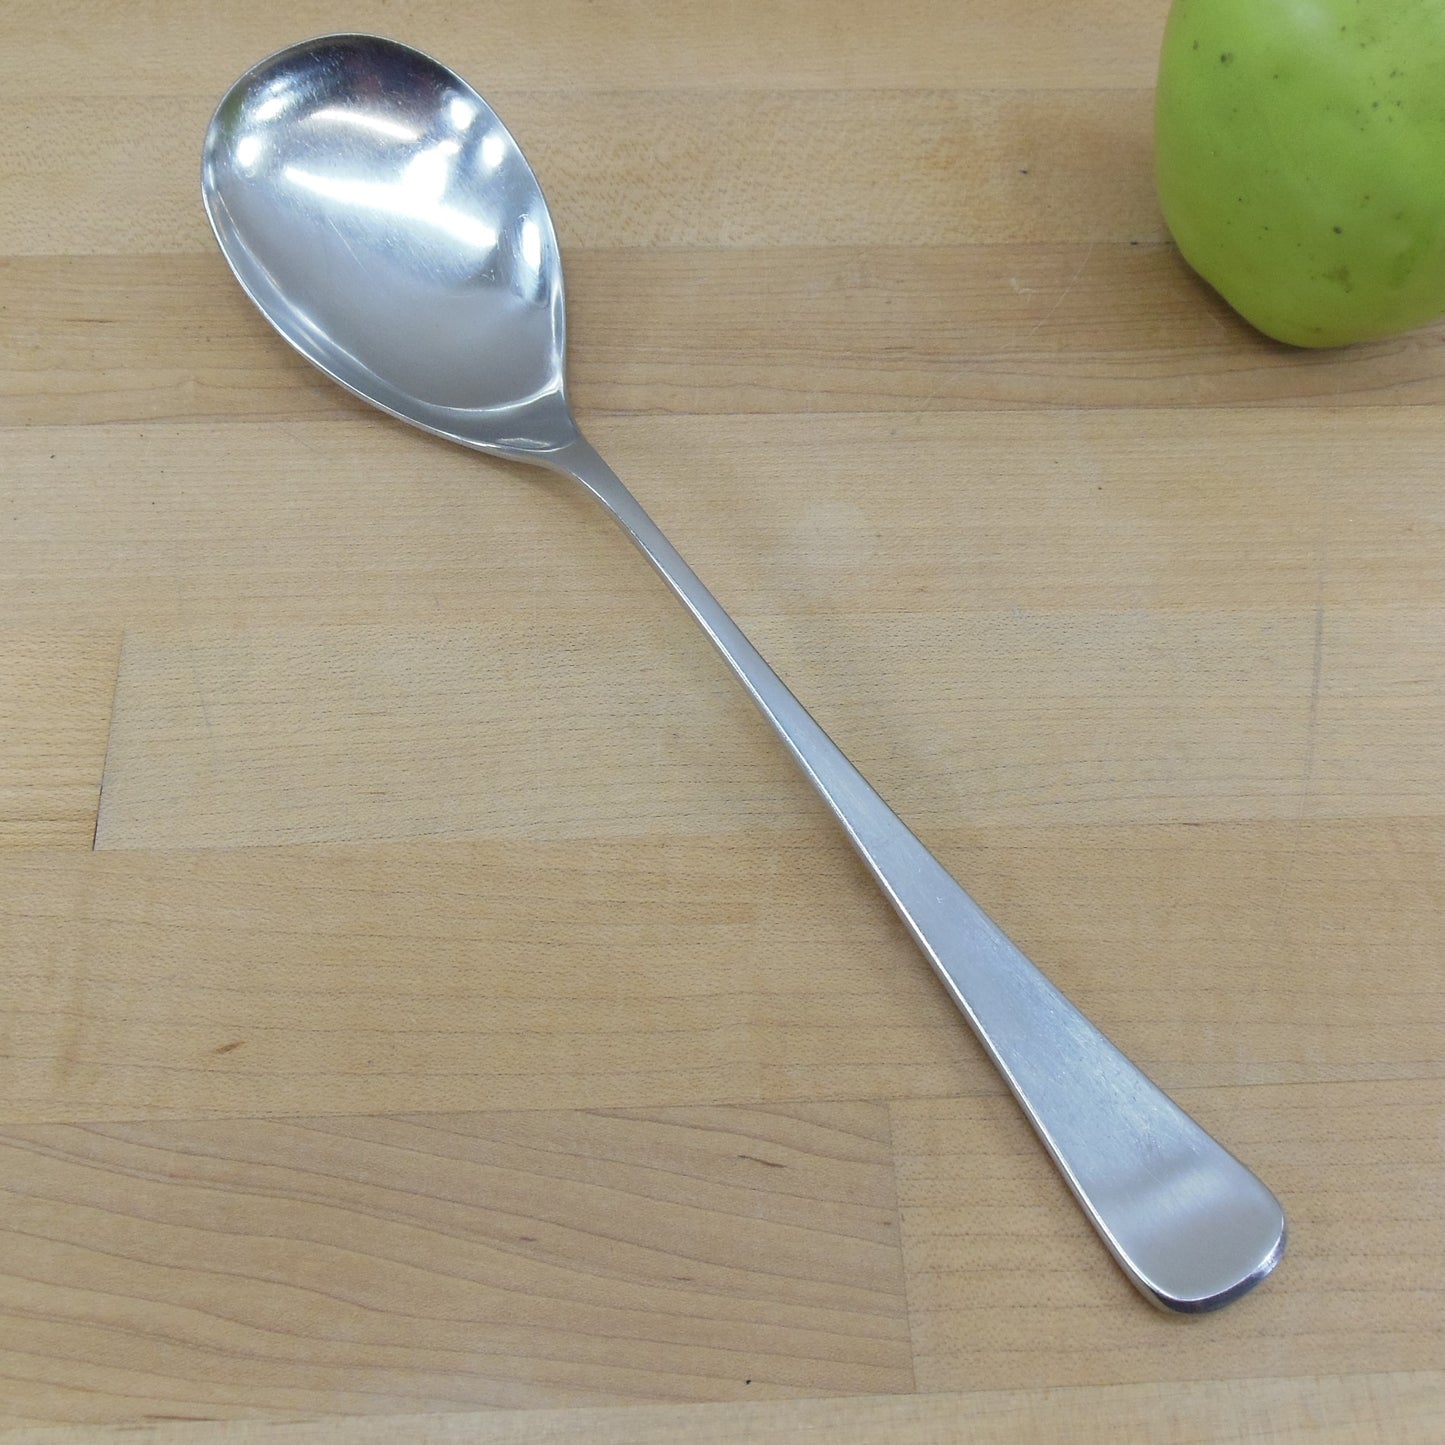 WMF Germany Cromargan Stainless Finesse Flatware - Salad Serving Spoon